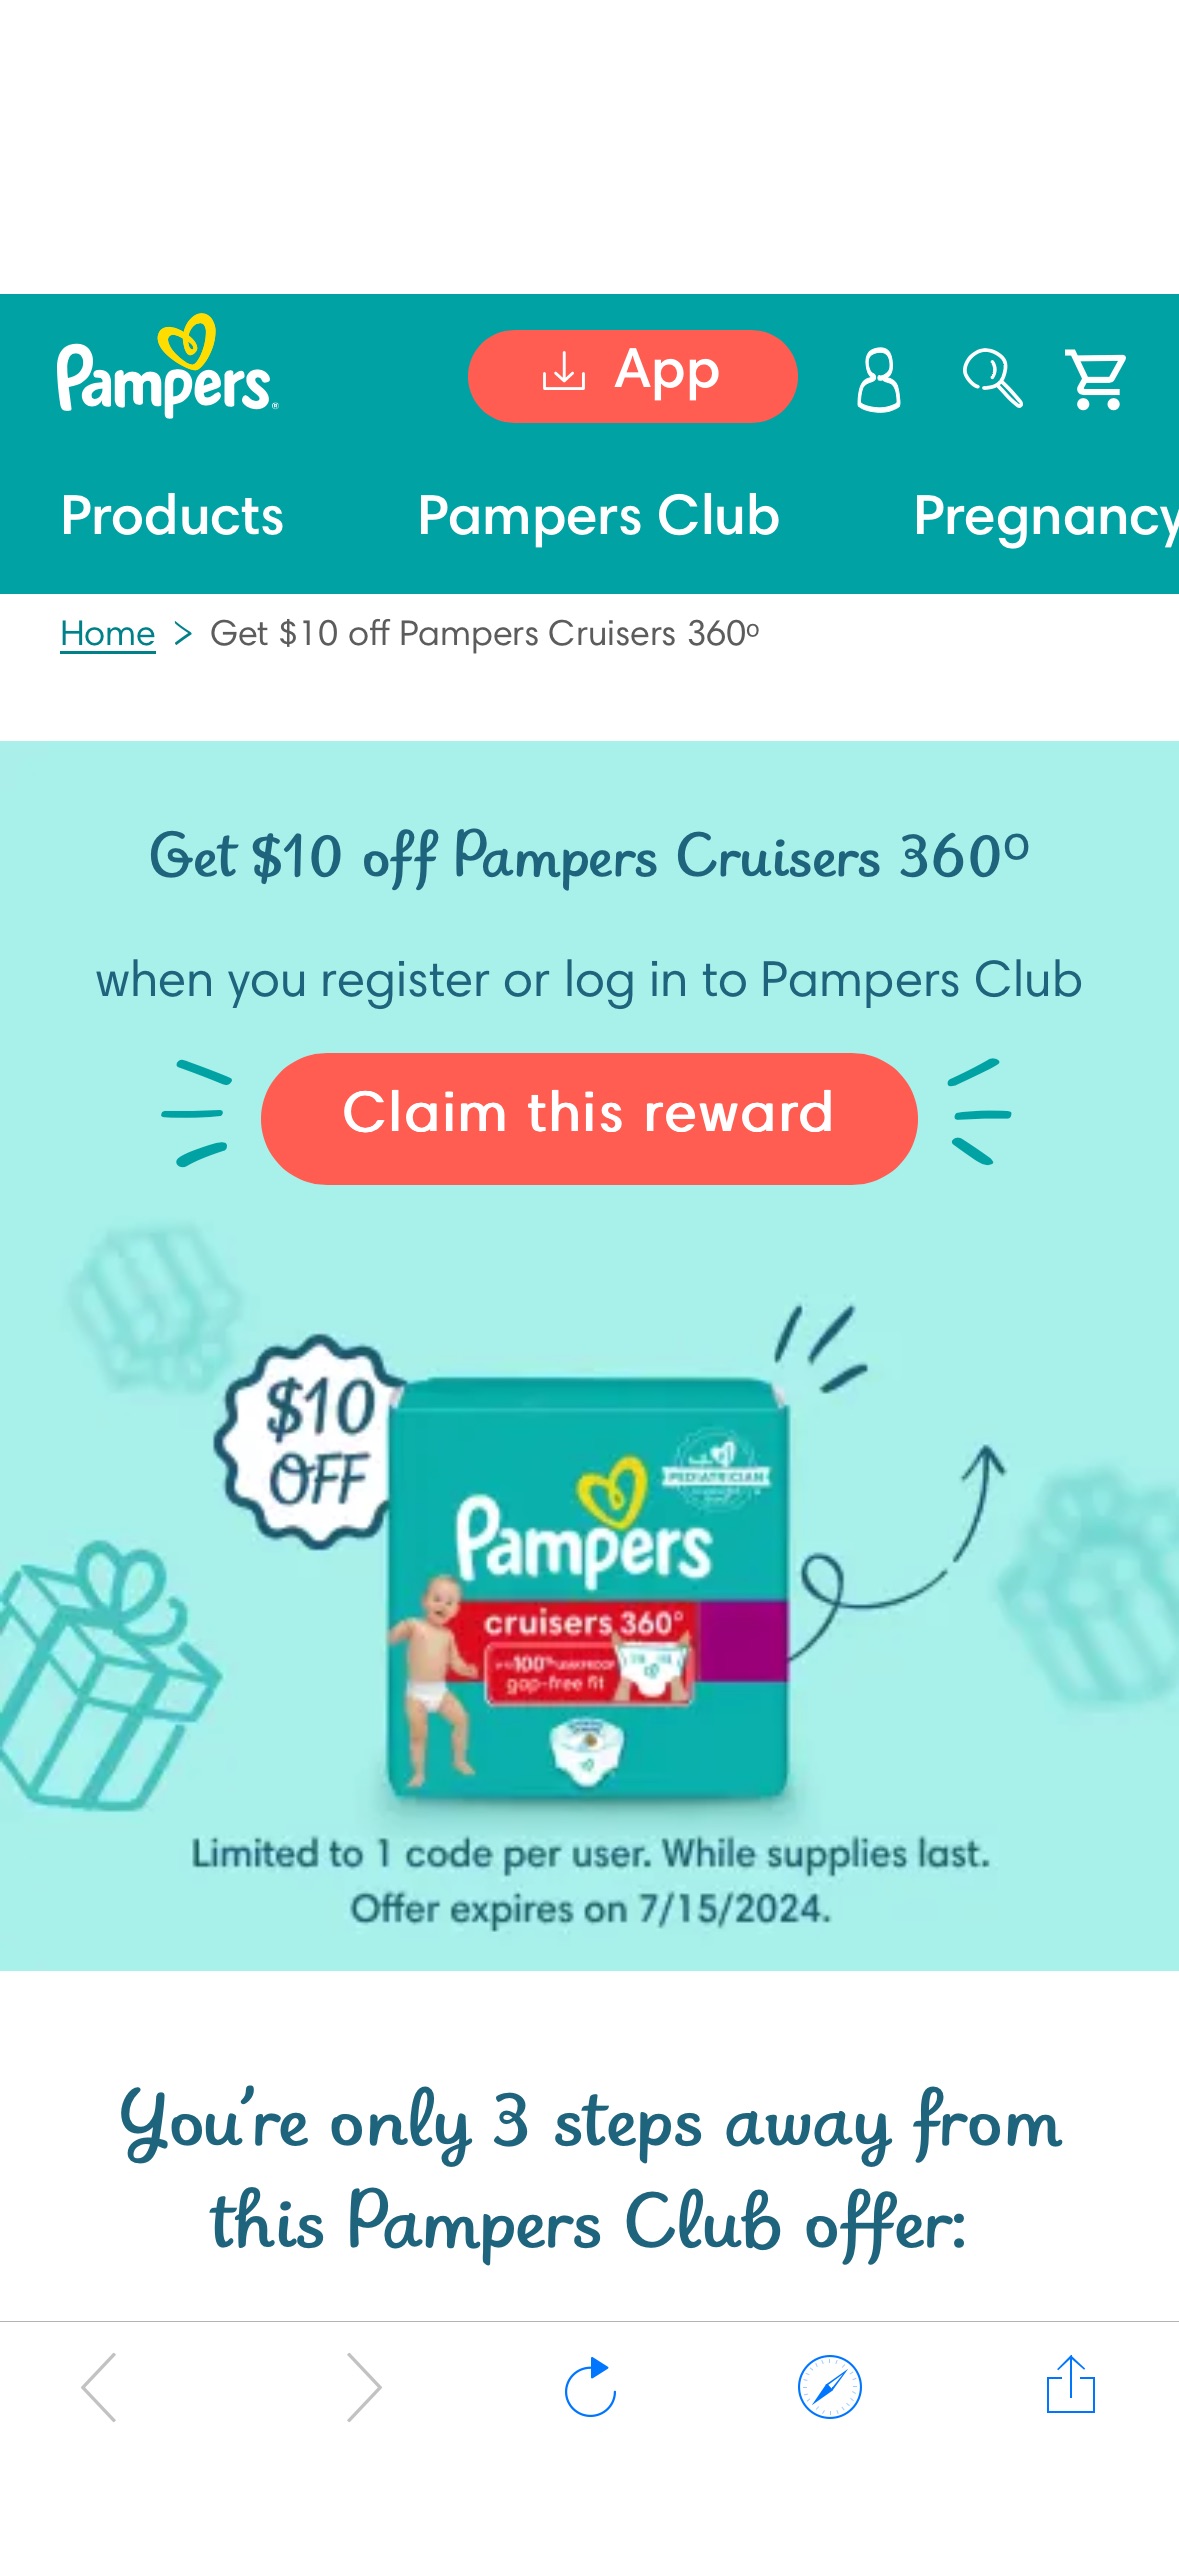 Pampers is offering a coupon for $10 off Pampers Cruisers Diapers to new and current users.